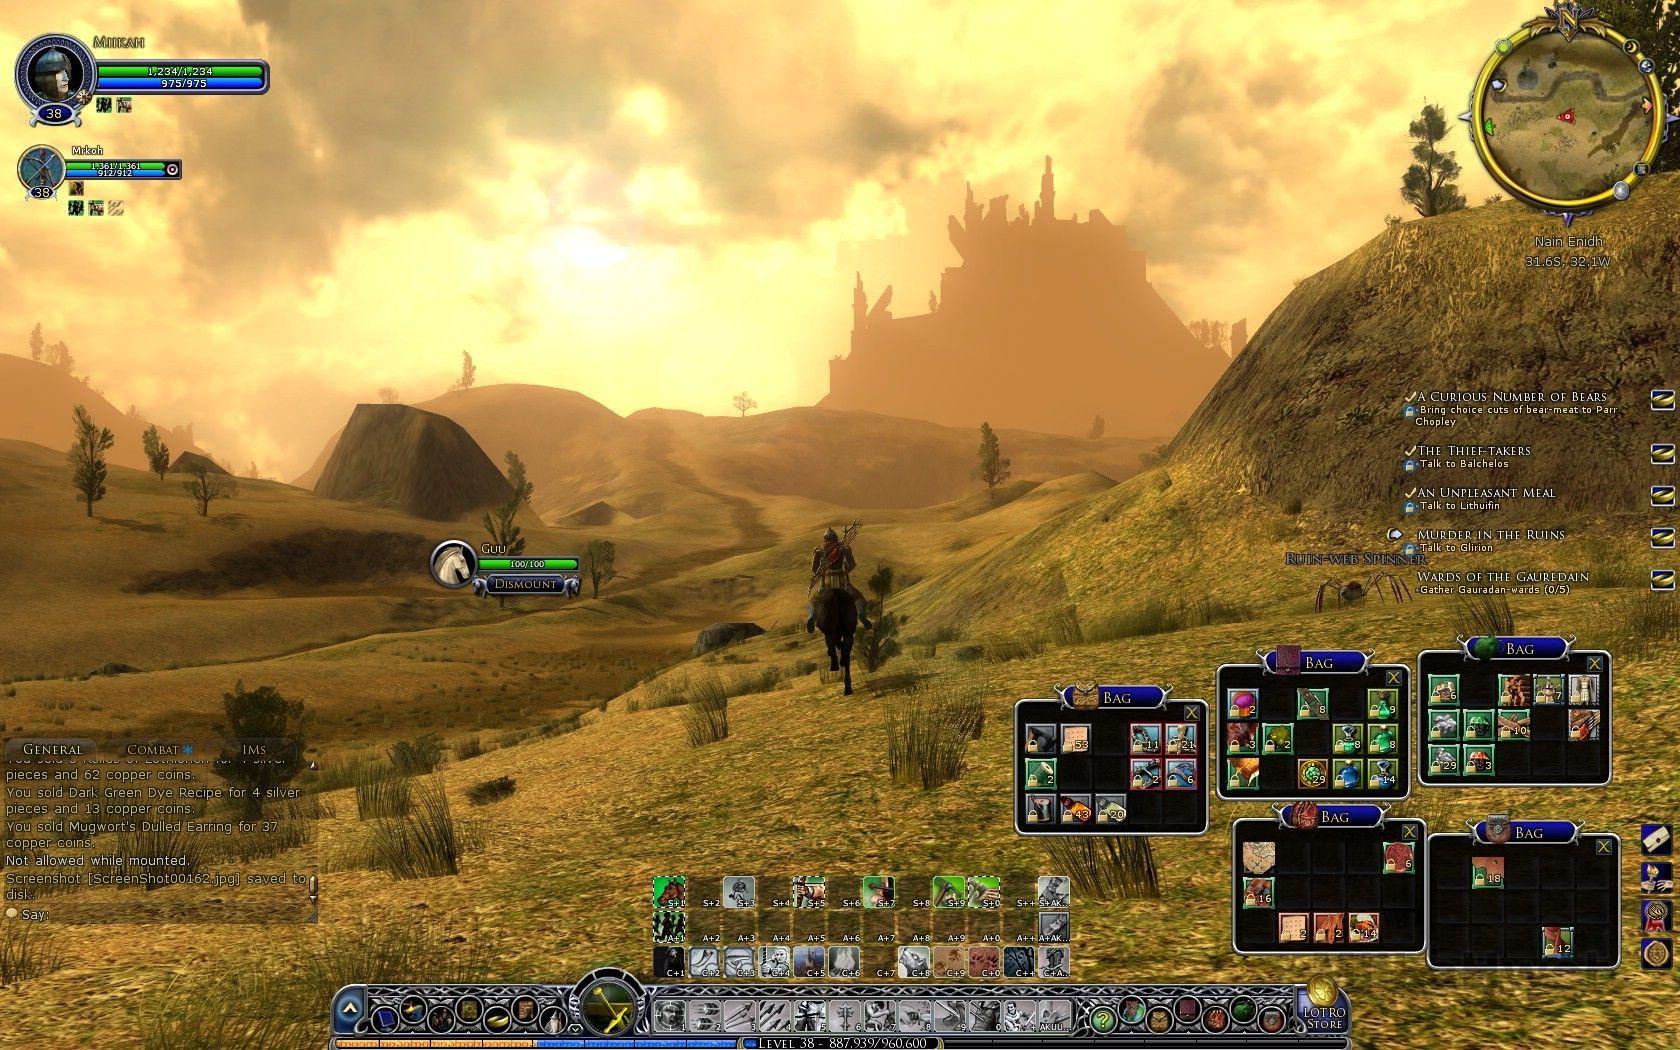 the lord of rings online